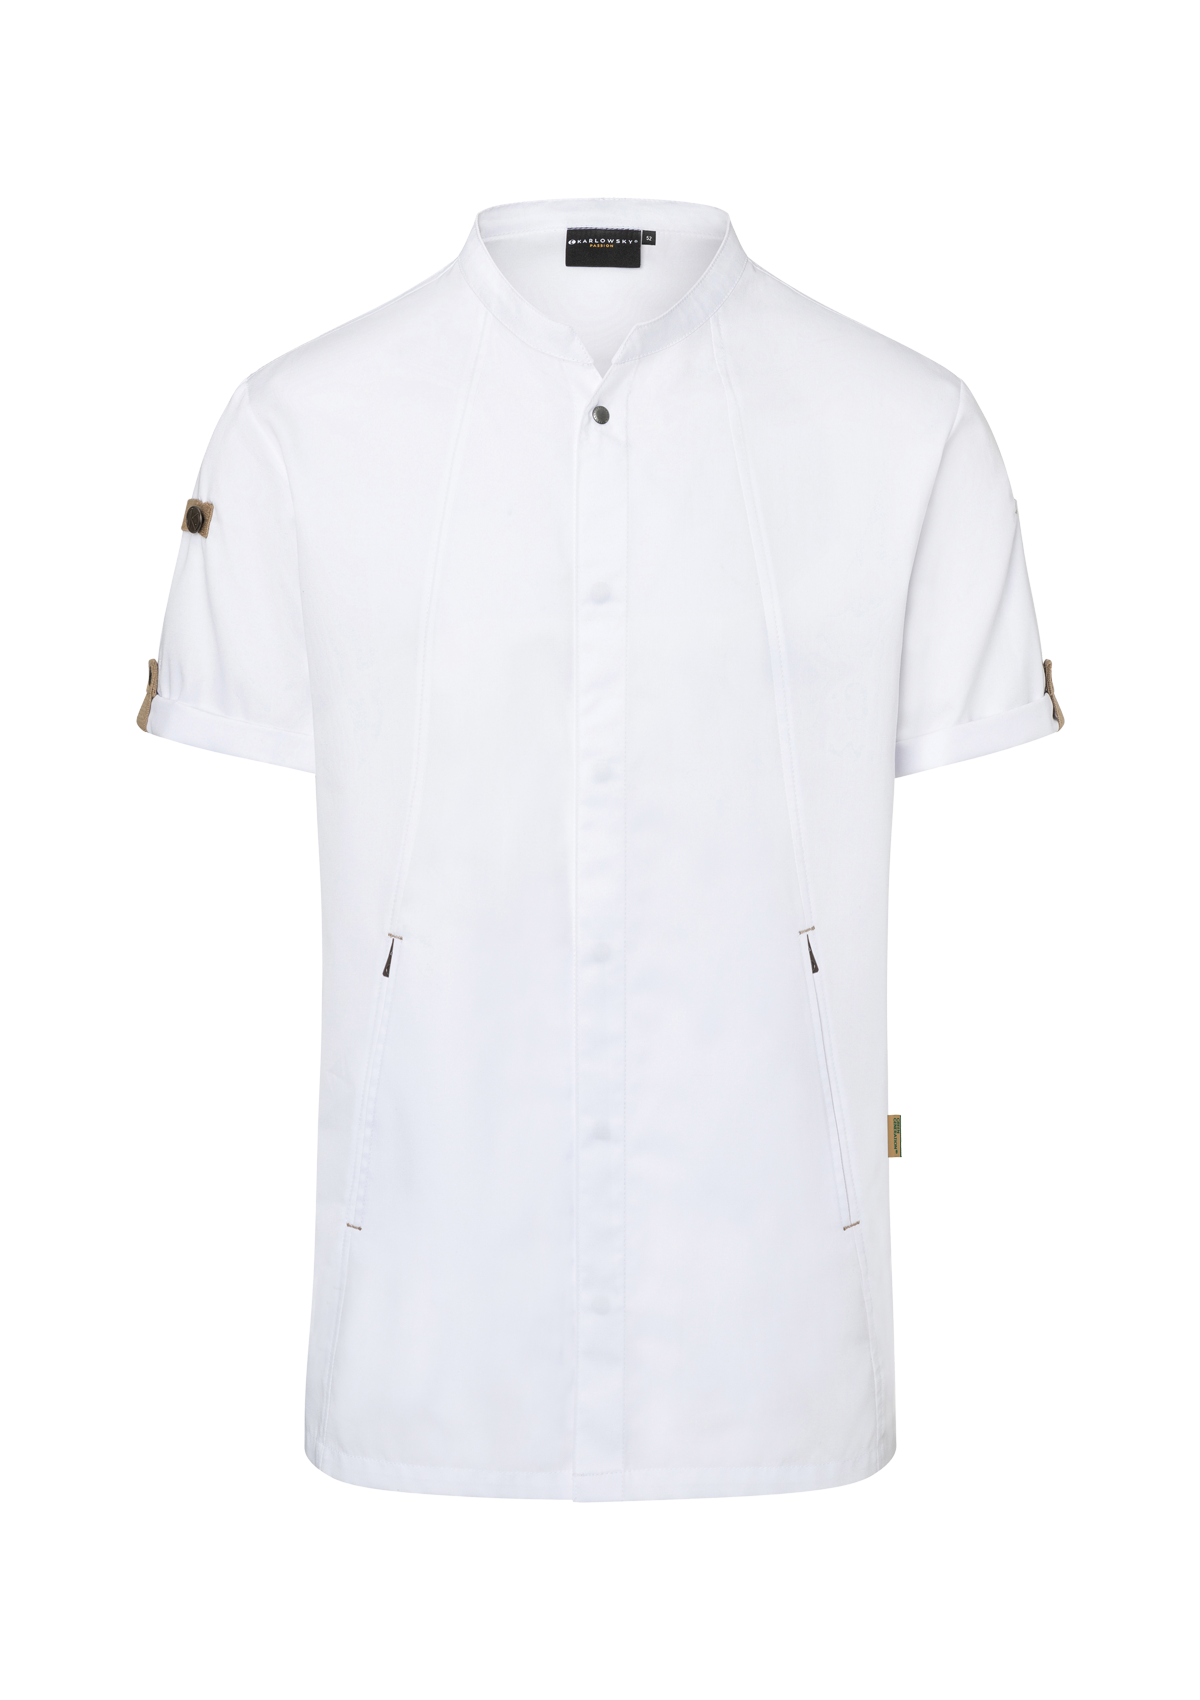 Short-Sleeved Sustainable Chef's Shirt Green-Generation For Men